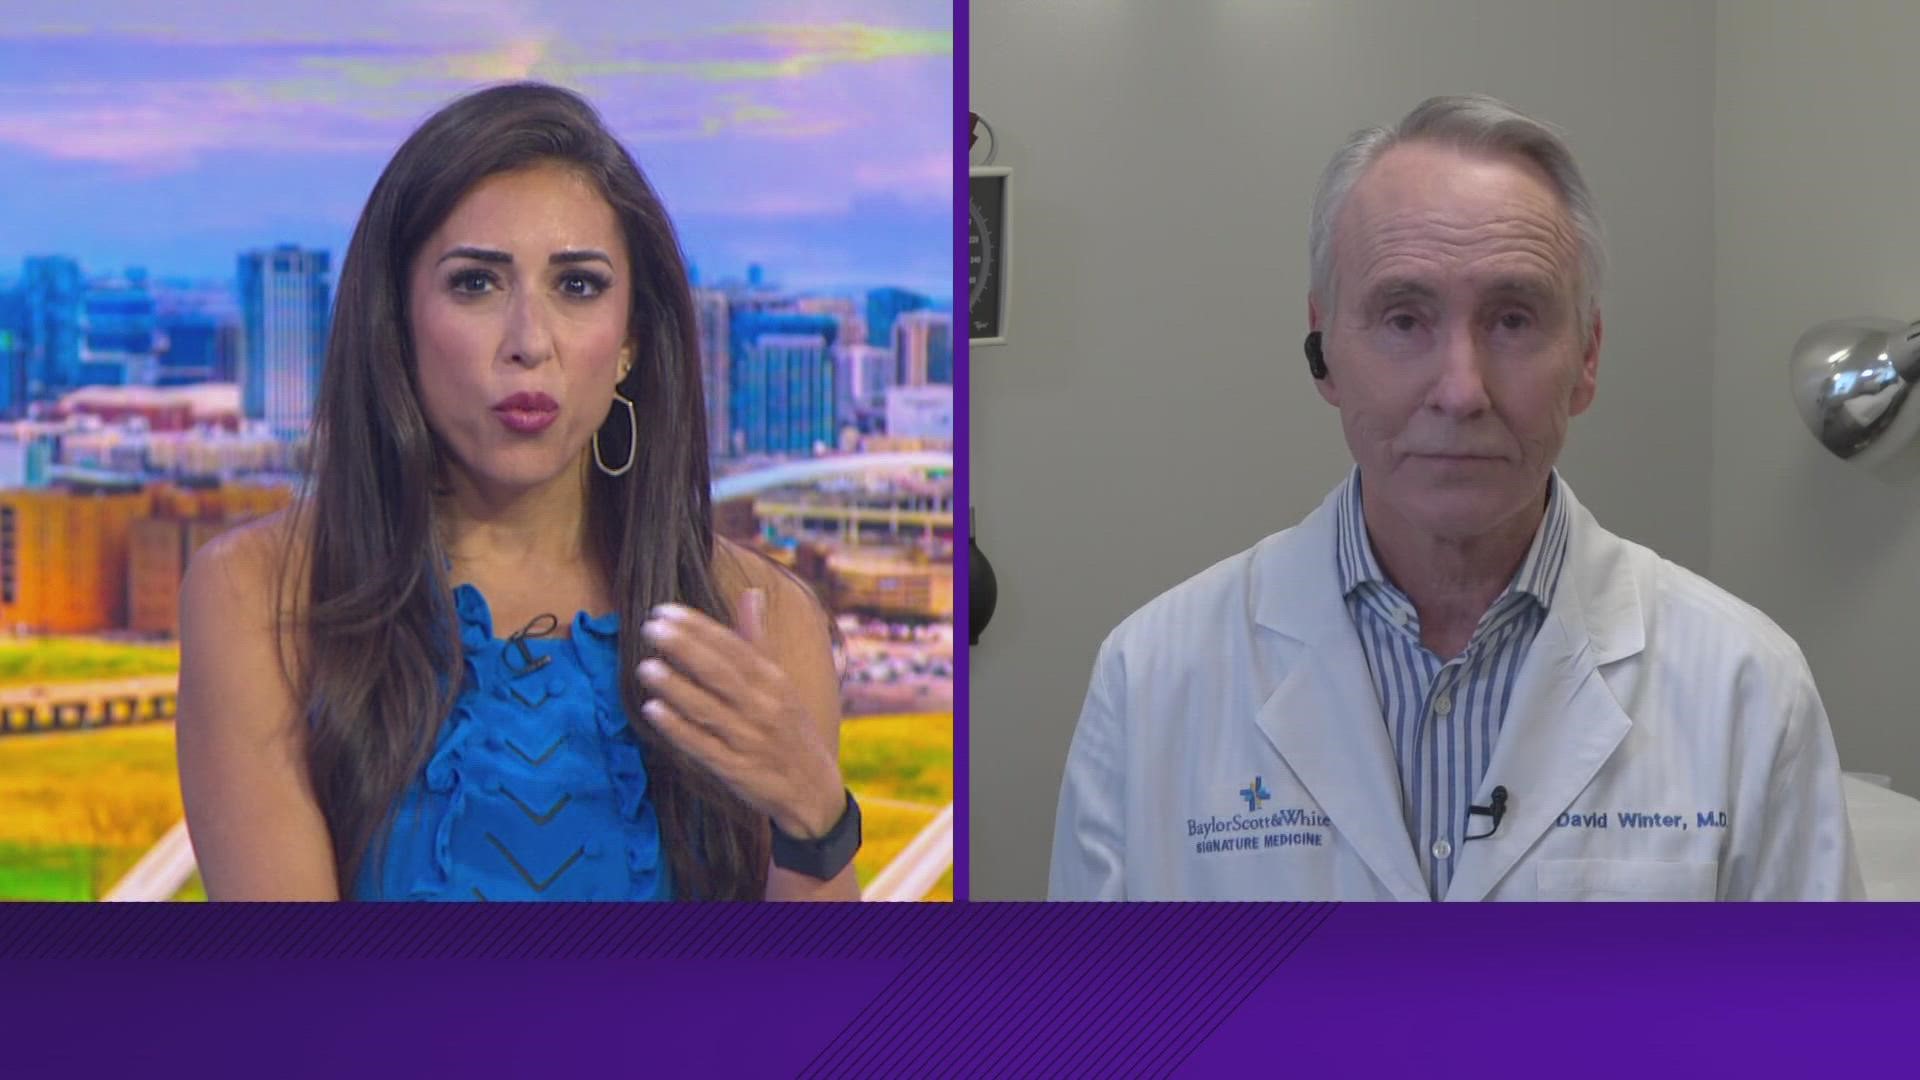 Dr. David Winter from Baylor Scott & White Health joins WFAA Midday to discuss COVID-19, monkeypox and more.